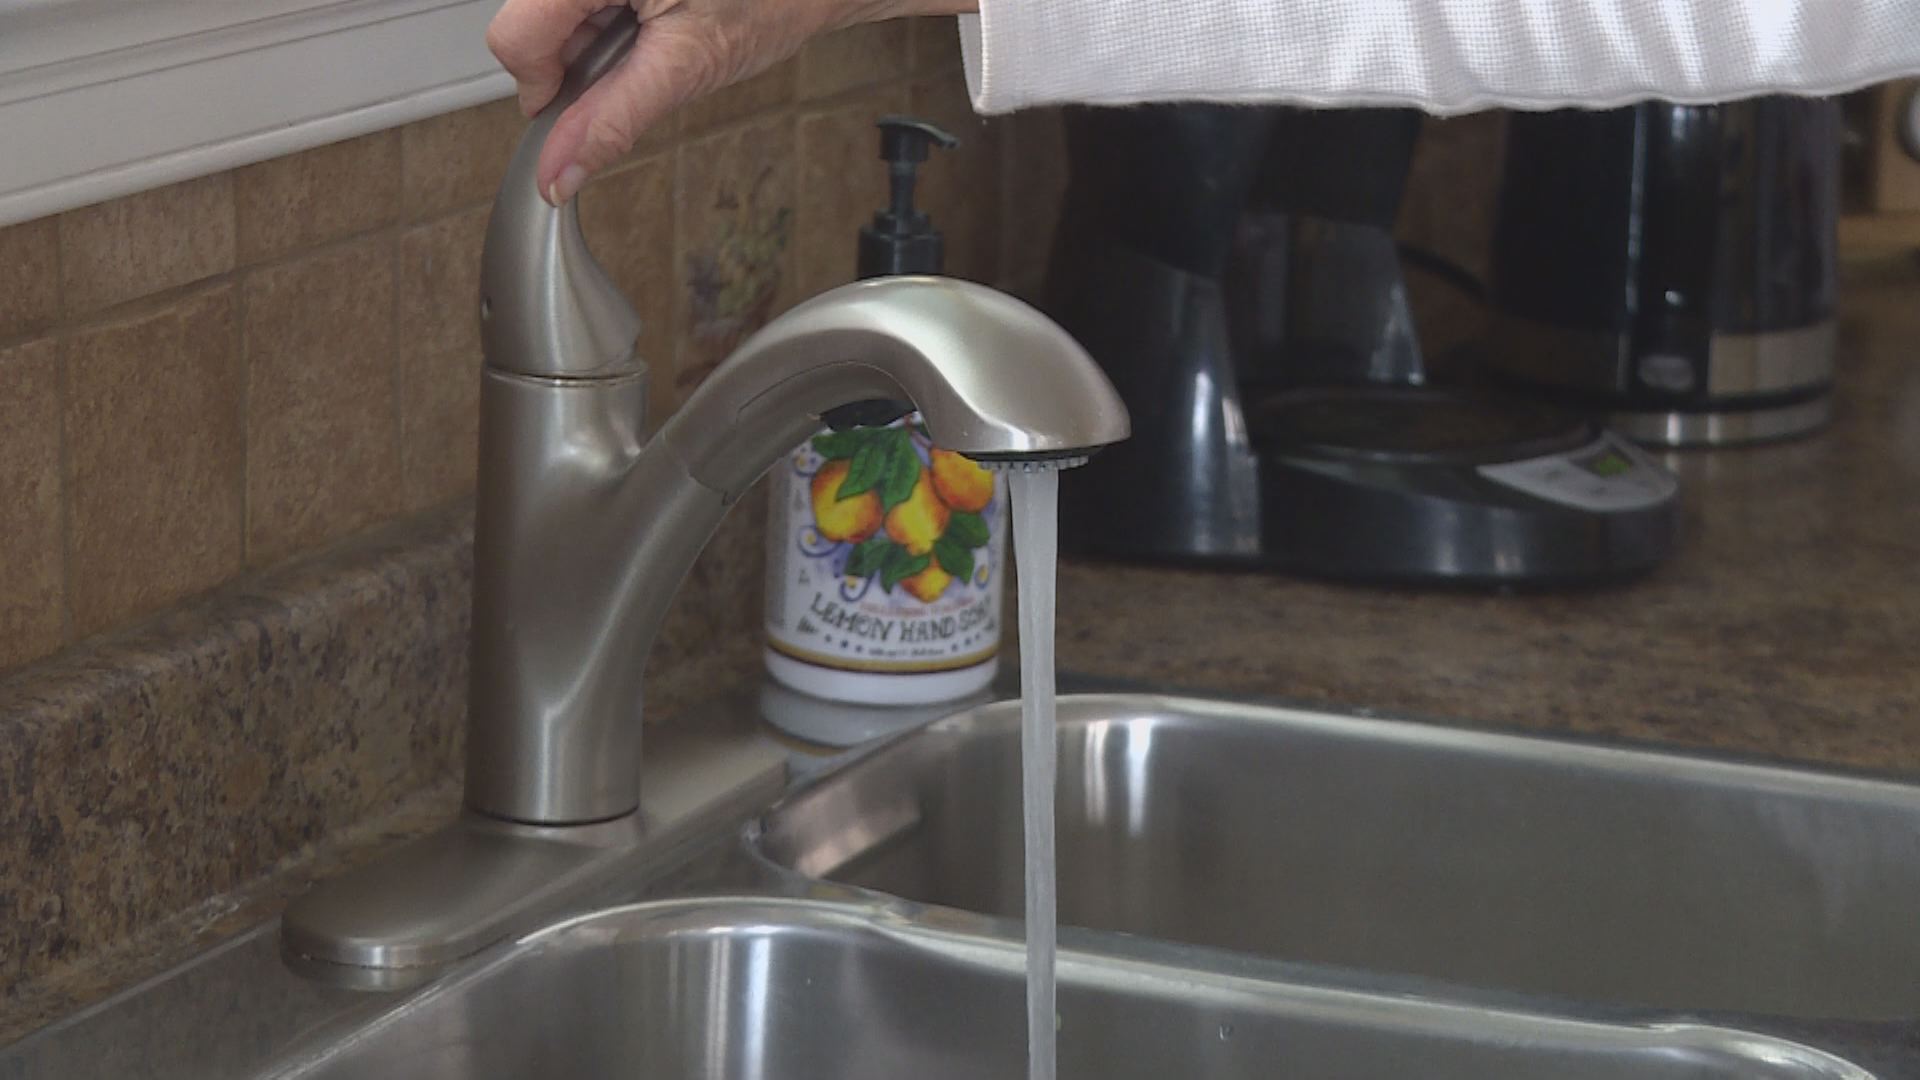 Wainwright water supply in ‘critical’ state after pump issue